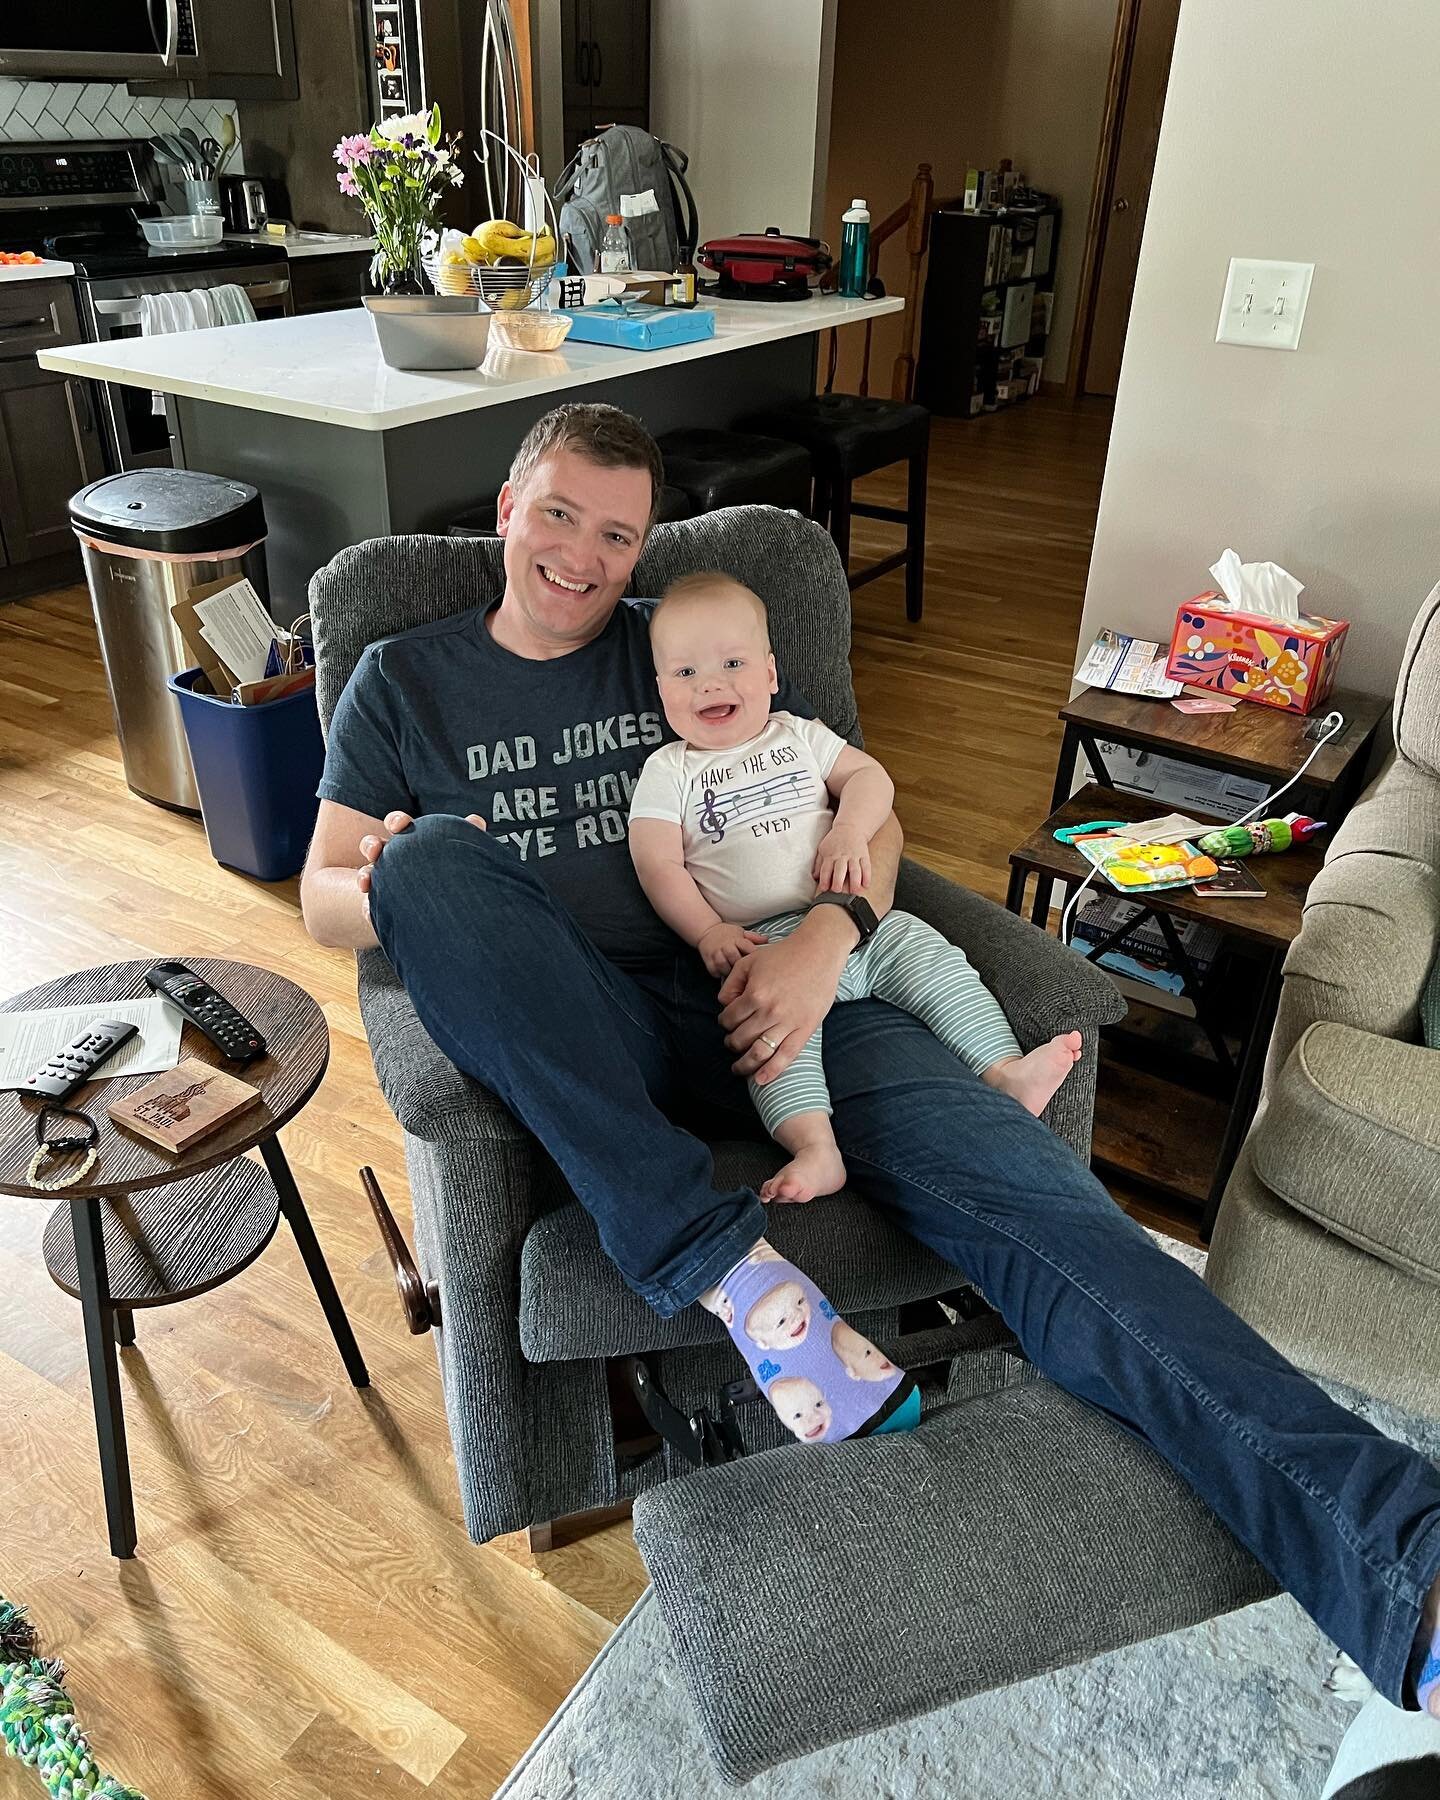 Best Father&rsquo;s Day gifts from my wife! 
Elliot&rsquo;s shirt says &ldquo;Best DAD 🎵Ever&rdquo;
My shirt says &ldquo;Dad jokes are how eye roll&rdquo; 
And she even got me custom socks with Elliot&rsquo;s face on them 😂
I have an amazing wife a